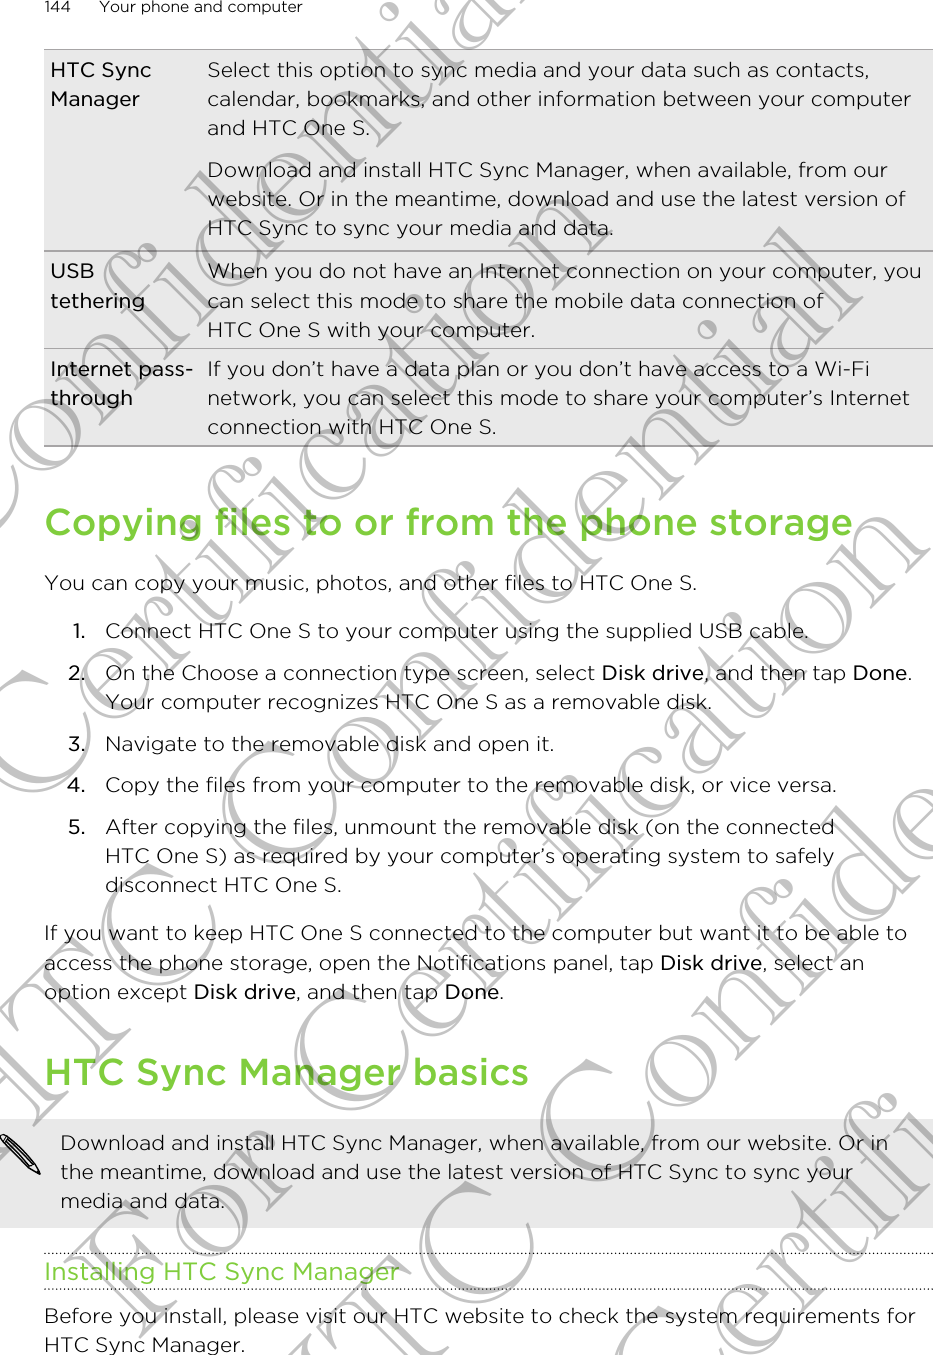 HTC SyncManagerSelect this option to sync media and your data such as contacts,calendar, bookmarks, and other information between your computerand HTC One S.Download and install HTC Sync Manager, when available, from ourwebsite. Or in the meantime, download and use the latest version ofHTC Sync to sync your media and data.USBtetheringWhen you do not have an Internet connection on your computer, youcan select this mode to share the mobile data connection ofHTC One S with your computer.Internet pass-throughIf you don’t have a data plan or you don’t have access to a Wi-Finetwork, you can select this mode to share your computer’s Internetconnection with HTC One S.Copying files to or from the phone storageYou can copy your music, photos, and other files to HTC One S.1. Connect HTC One S to your computer using the supplied USB cable.2. On the Choose a connection type screen, select Disk drive, and then tap Done.Your computer recognizes HTC One S as a removable disk.3. Navigate to the removable disk and open it.4. Copy the files from your computer to the removable disk, or vice versa.5. After copying the files, unmount the removable disk (on the connectedHTC One S) as required by your computer’s operating system to safelydisconnect HTC One S.If you want to keep HTC One S connected to the computer but want it to be able toaccess the phone storage, open the Notifications panel, tap Disk drive, select anoption except Disk drive, and then tap Done.HTC Sync Manager basicsDownload and install HTC Sync Manager, when available, from our website. Or inthe meantime, download and use the latest version of HTC Sync to sync yourmedia and data.Installing HTC Sync ManagerBefore you install, please visit our HTC website to check the system requirements forHTC Sync Manager.144 Your phone and computerHTC Confidential For Certification HTC Confidential For Certification HTC Confidential For Certification